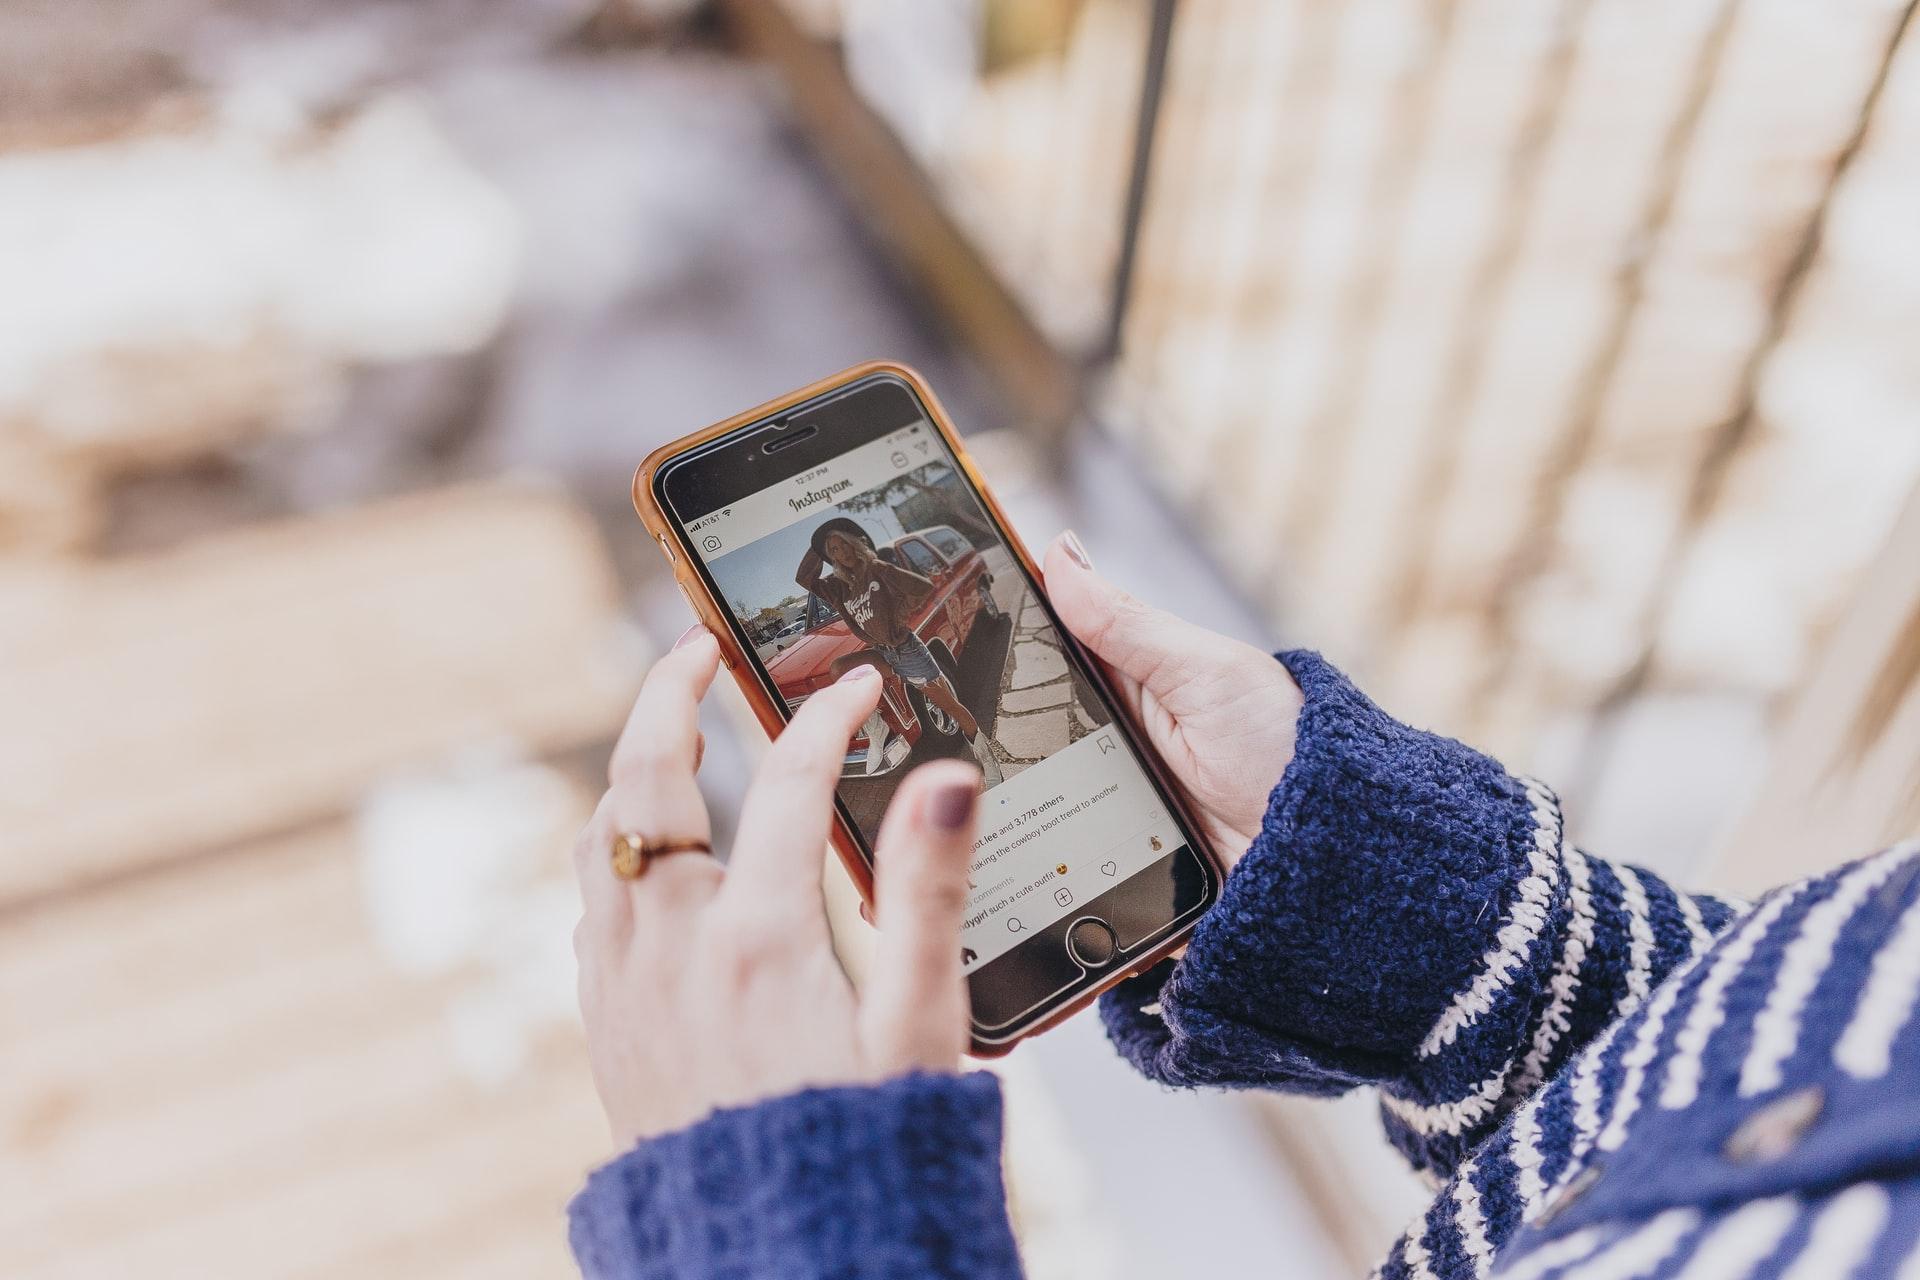 Instagram Ads: 7 Powerful Tips for Creating Instagram Video Ads That Generate Sales